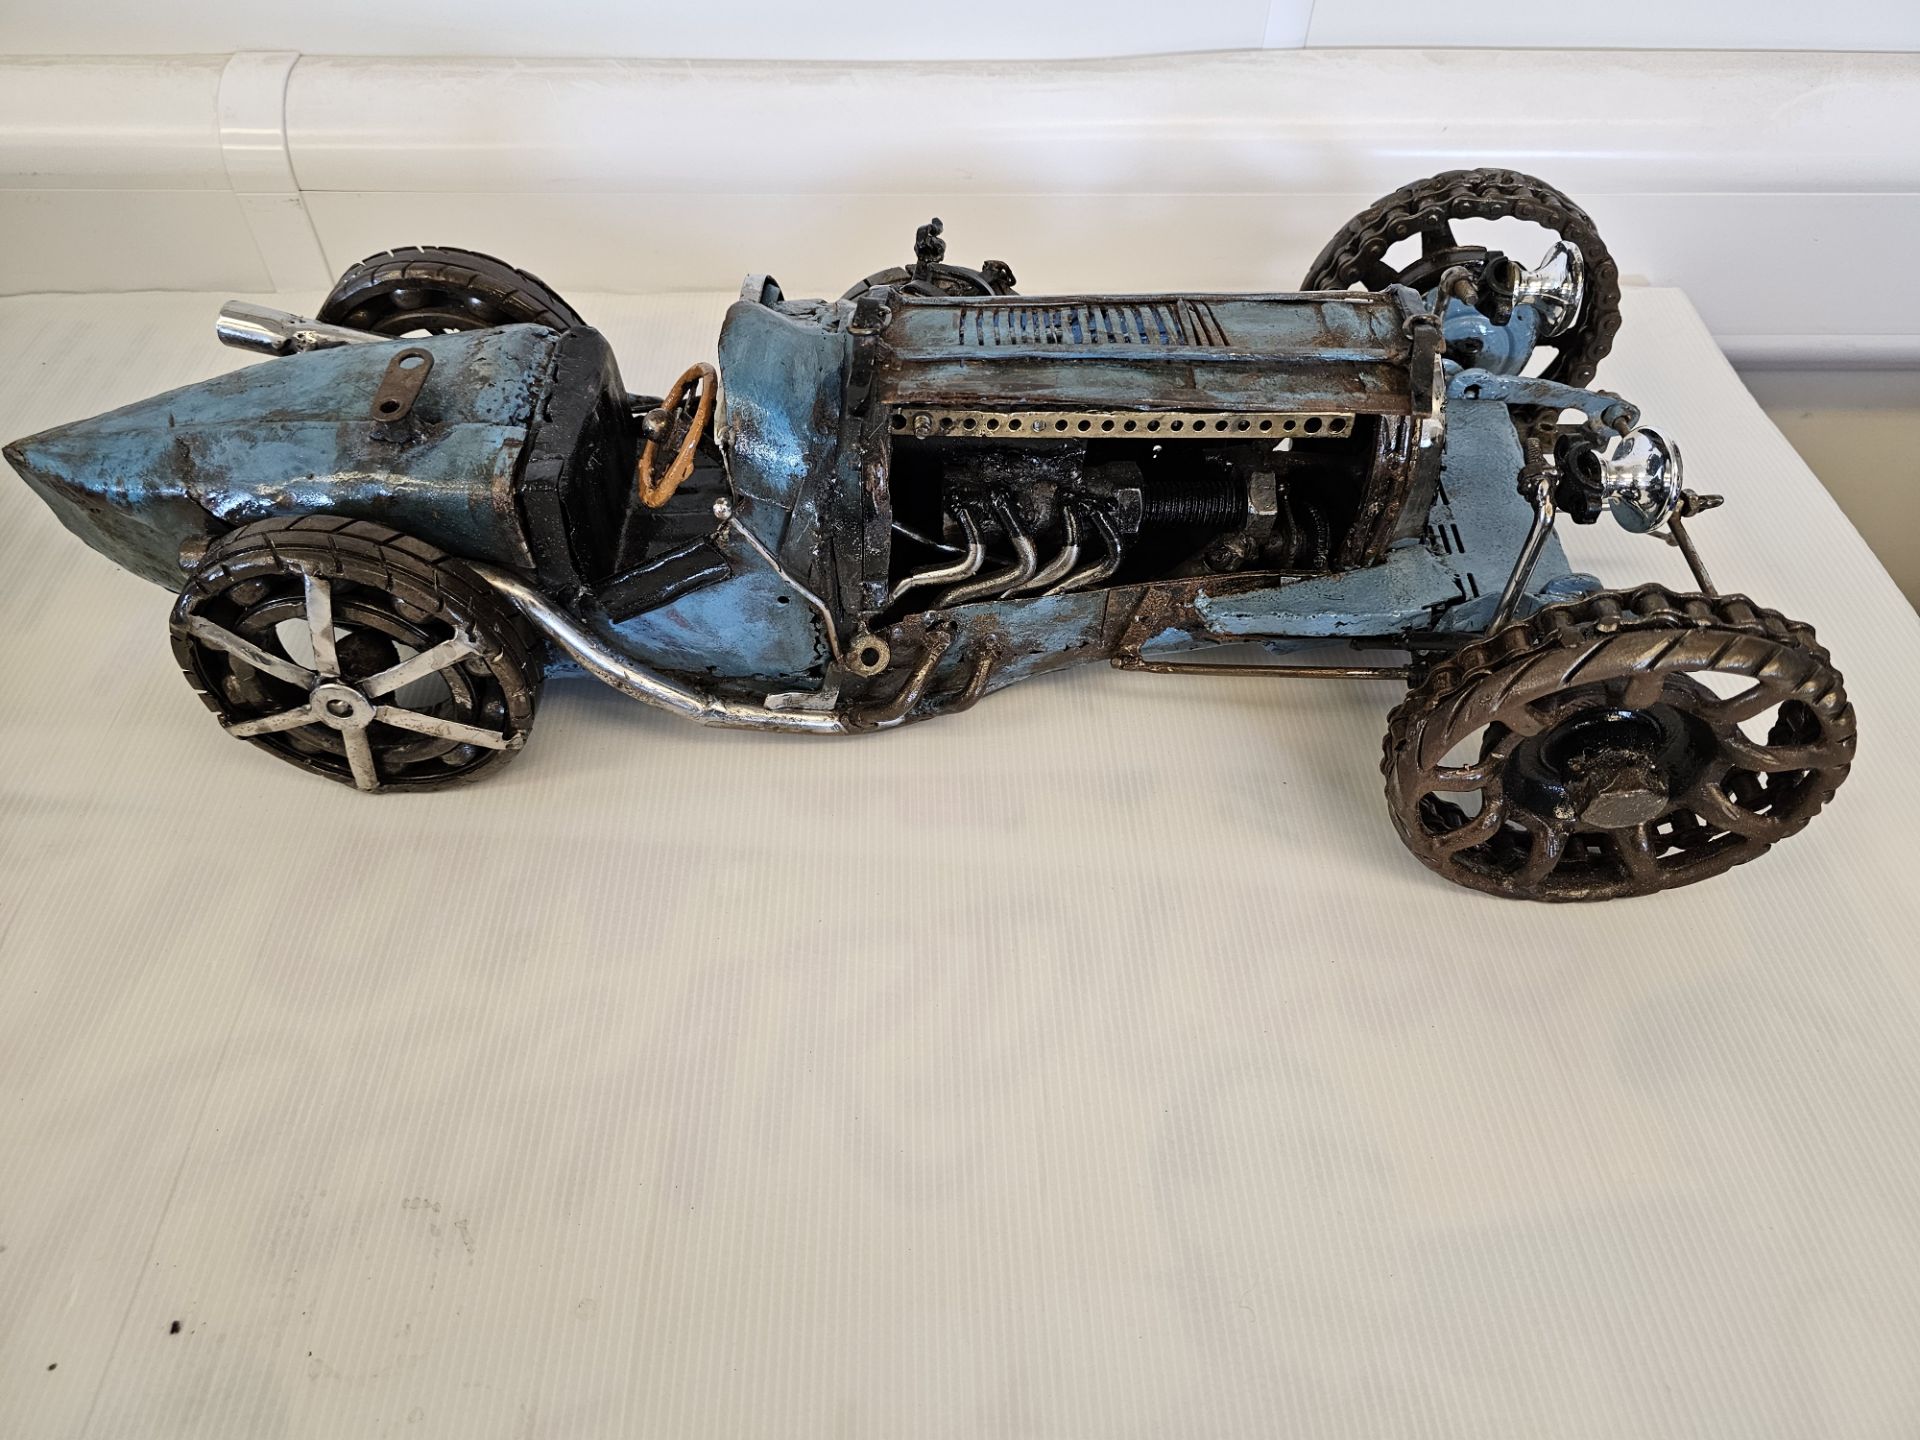 1923 Mercedes Benz 10/30 HP - One-off artistic model made from Iron, steel and glass, These rare and - Image 6 of 7